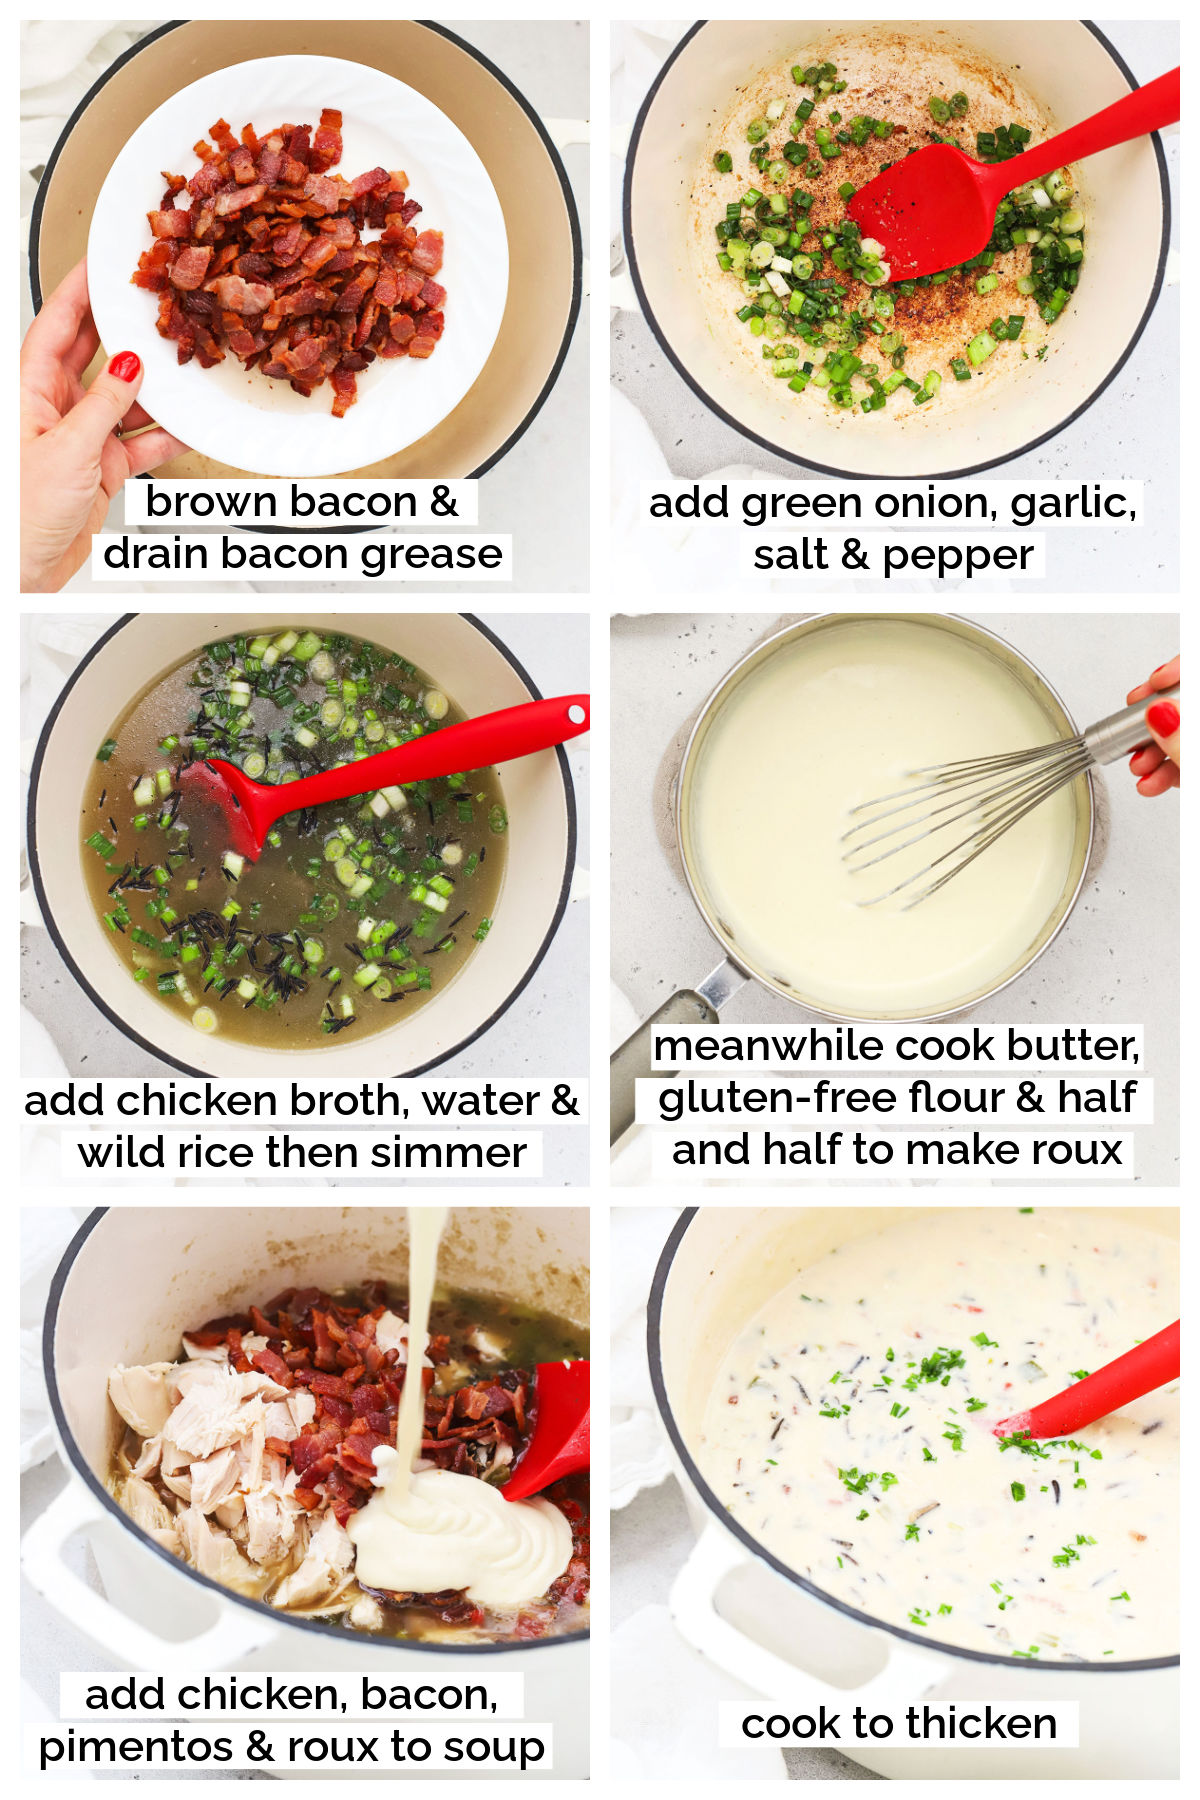 making gluten-free wild rice soup step by step